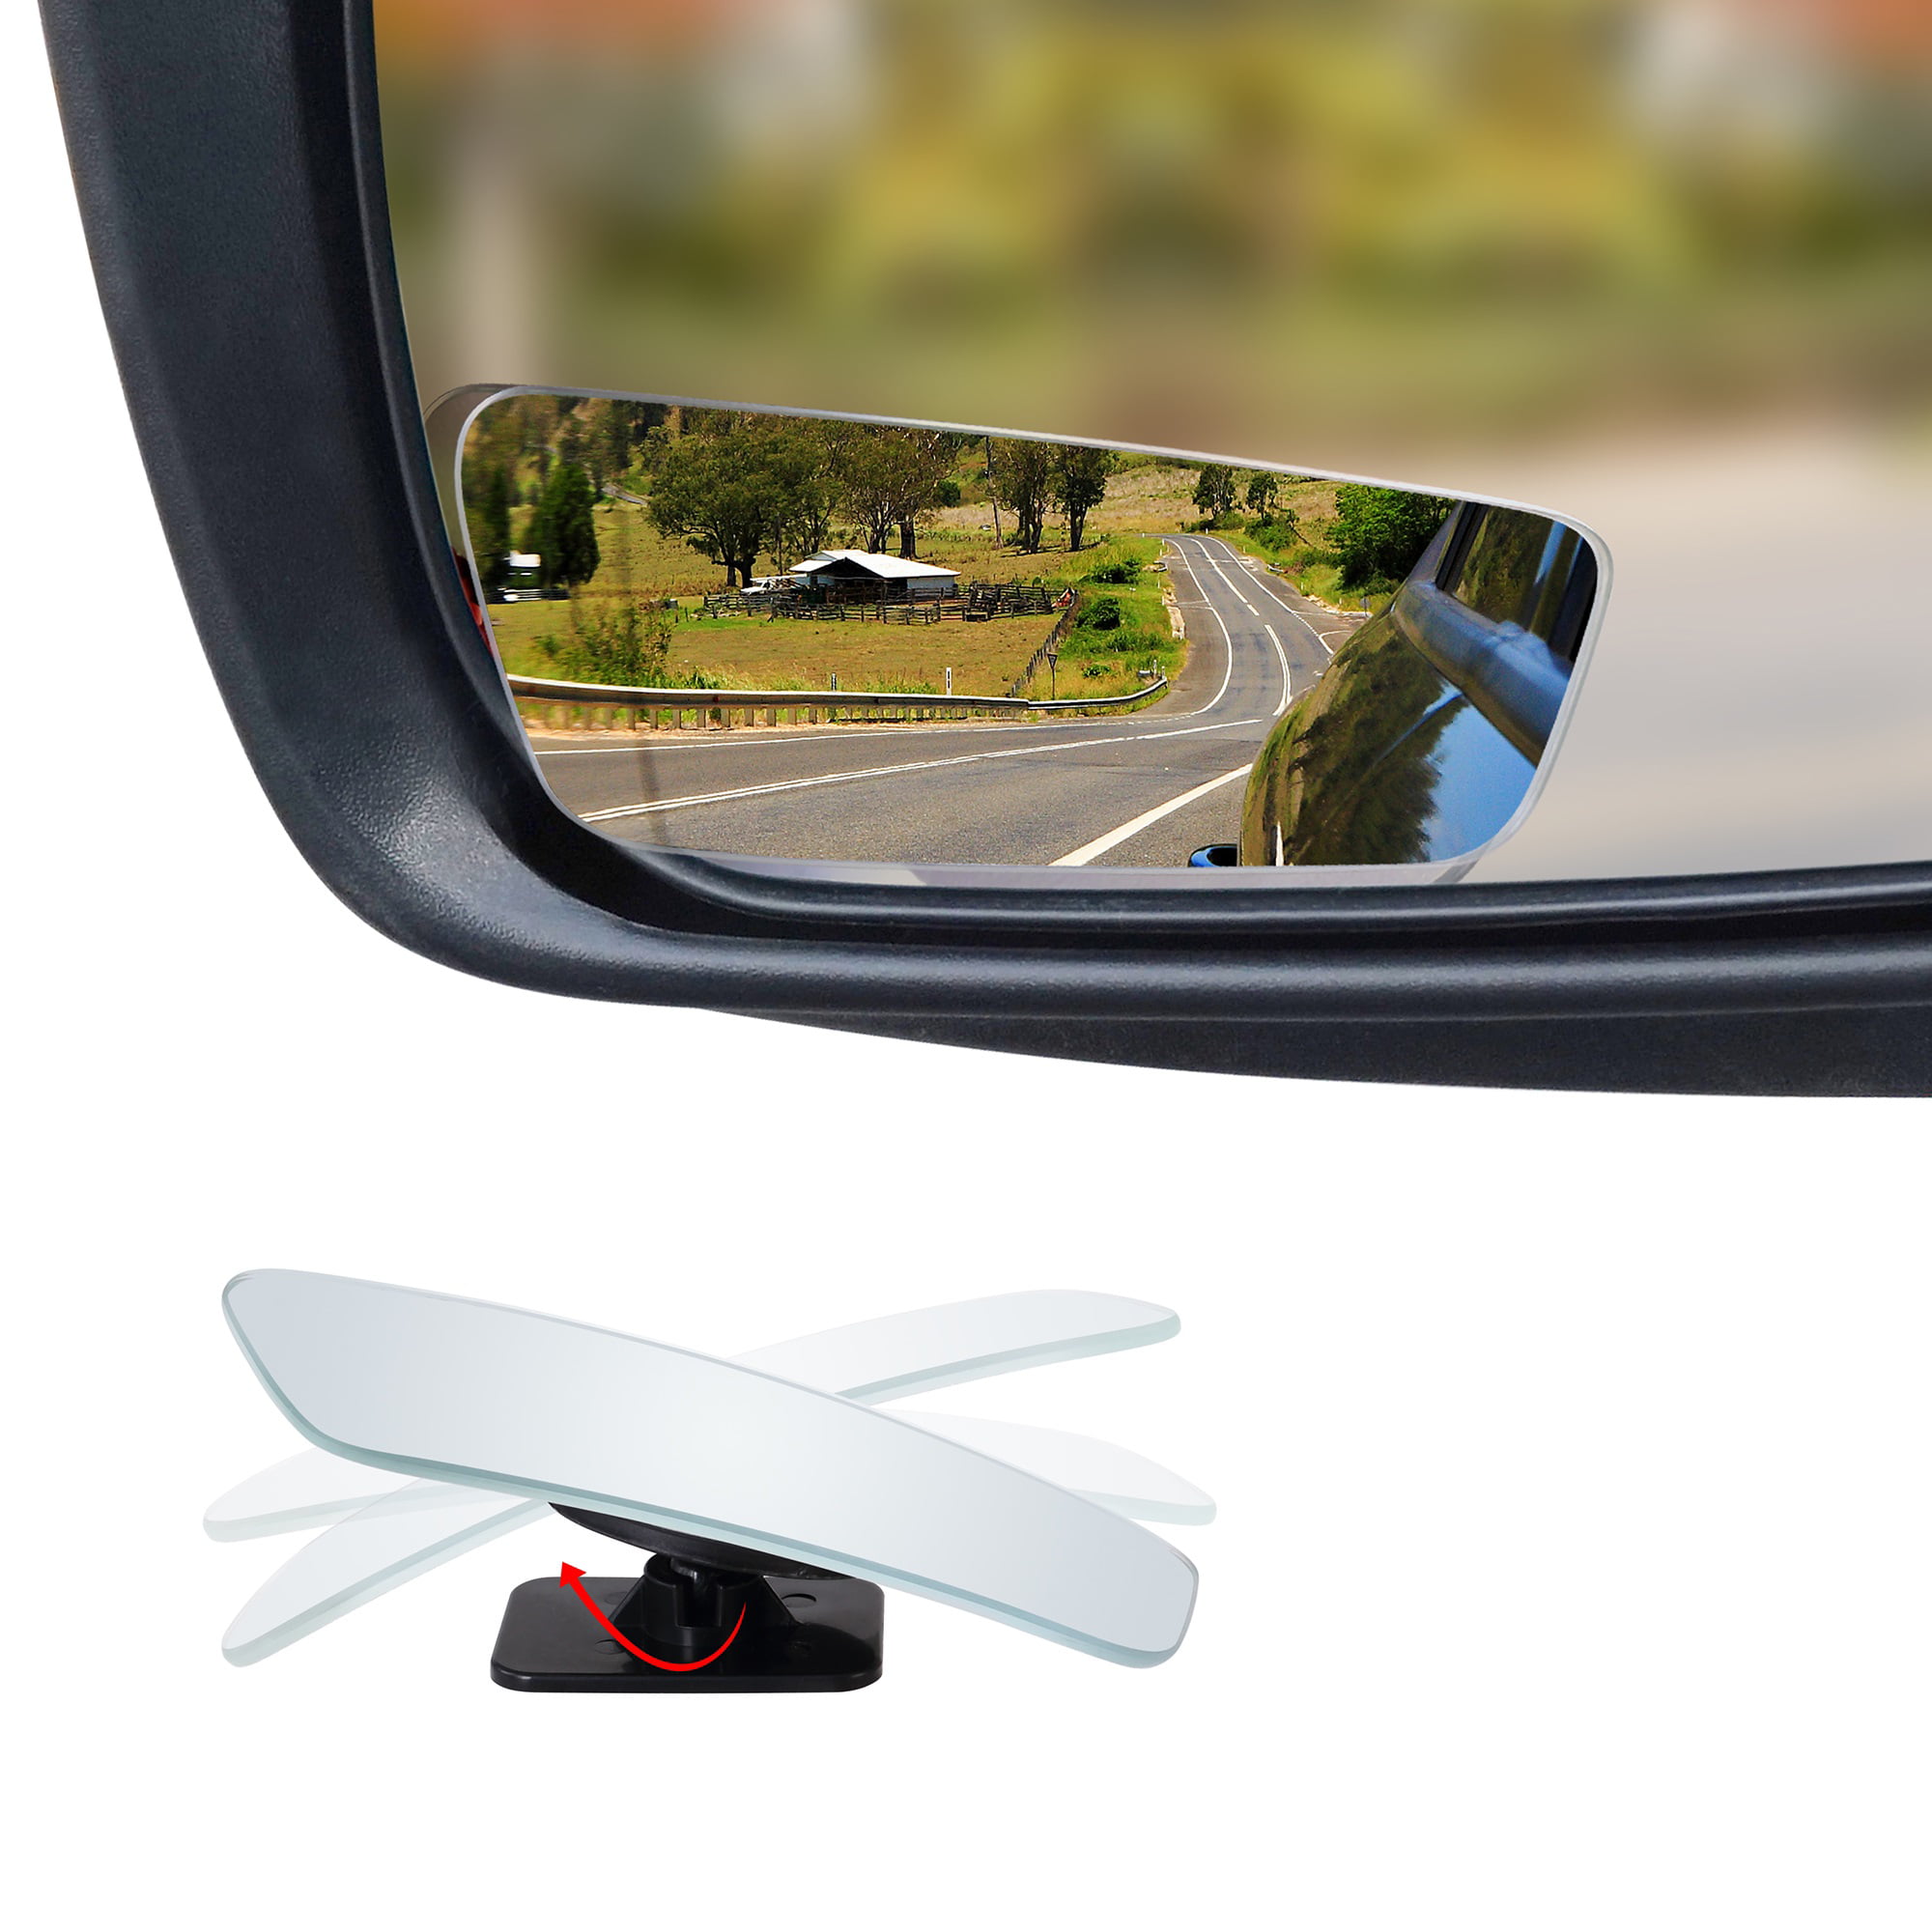 Wedge Hot Spot Blind 3” Mirror Convex Glass w/ Stick-on Black for Car-Truck 